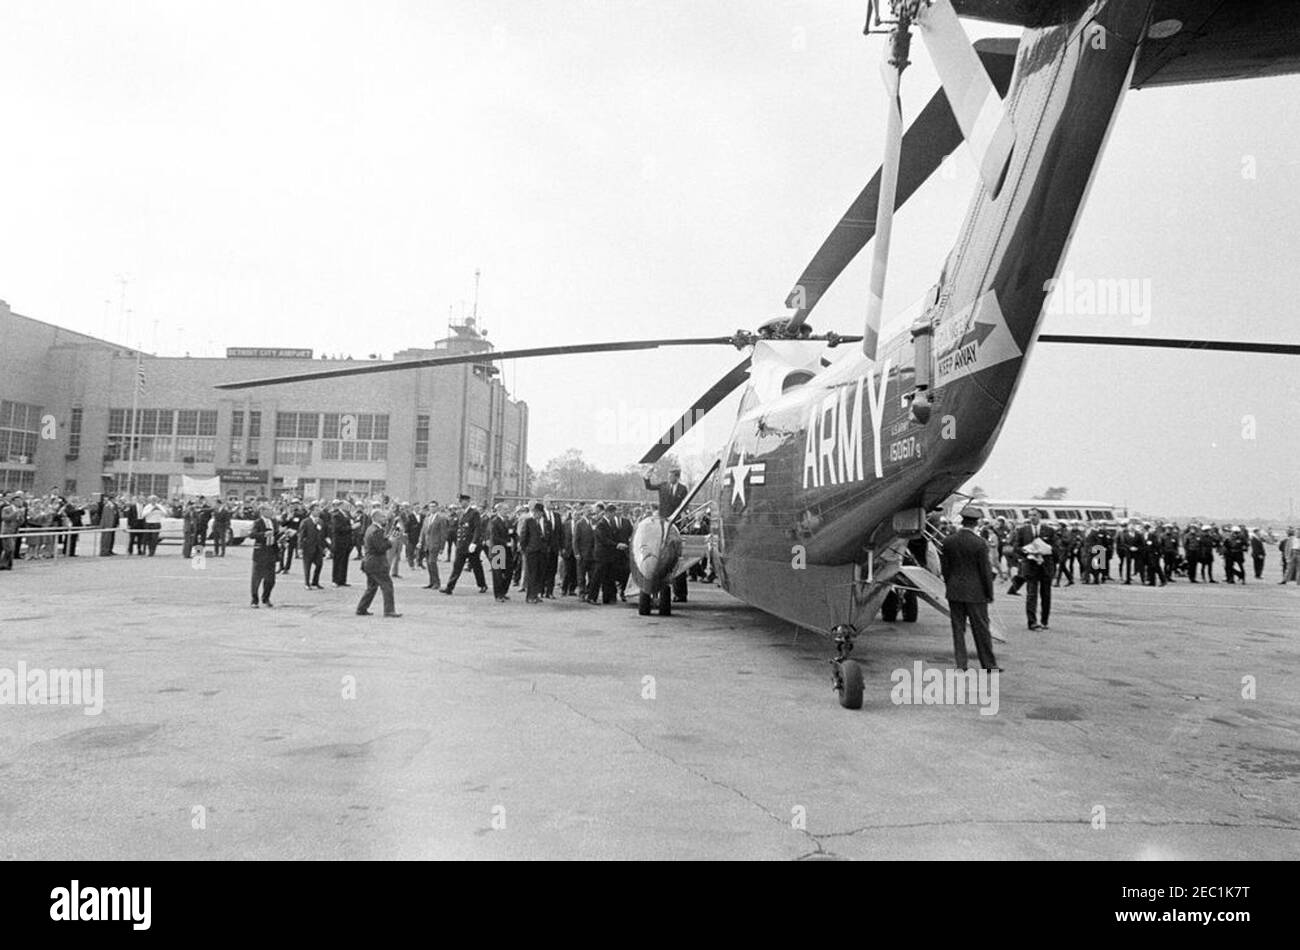 Congressional campaign trip: Detroit, Michigan, remarks at hotel, tour of city, departure. President John F. Kennedy (center) waves as he boards a United States Army helicopter prior to his departure from Detroit City Airport for Flint, Michigan, during a congressional campaign trip. Detroit, Michigan. Stock Photo